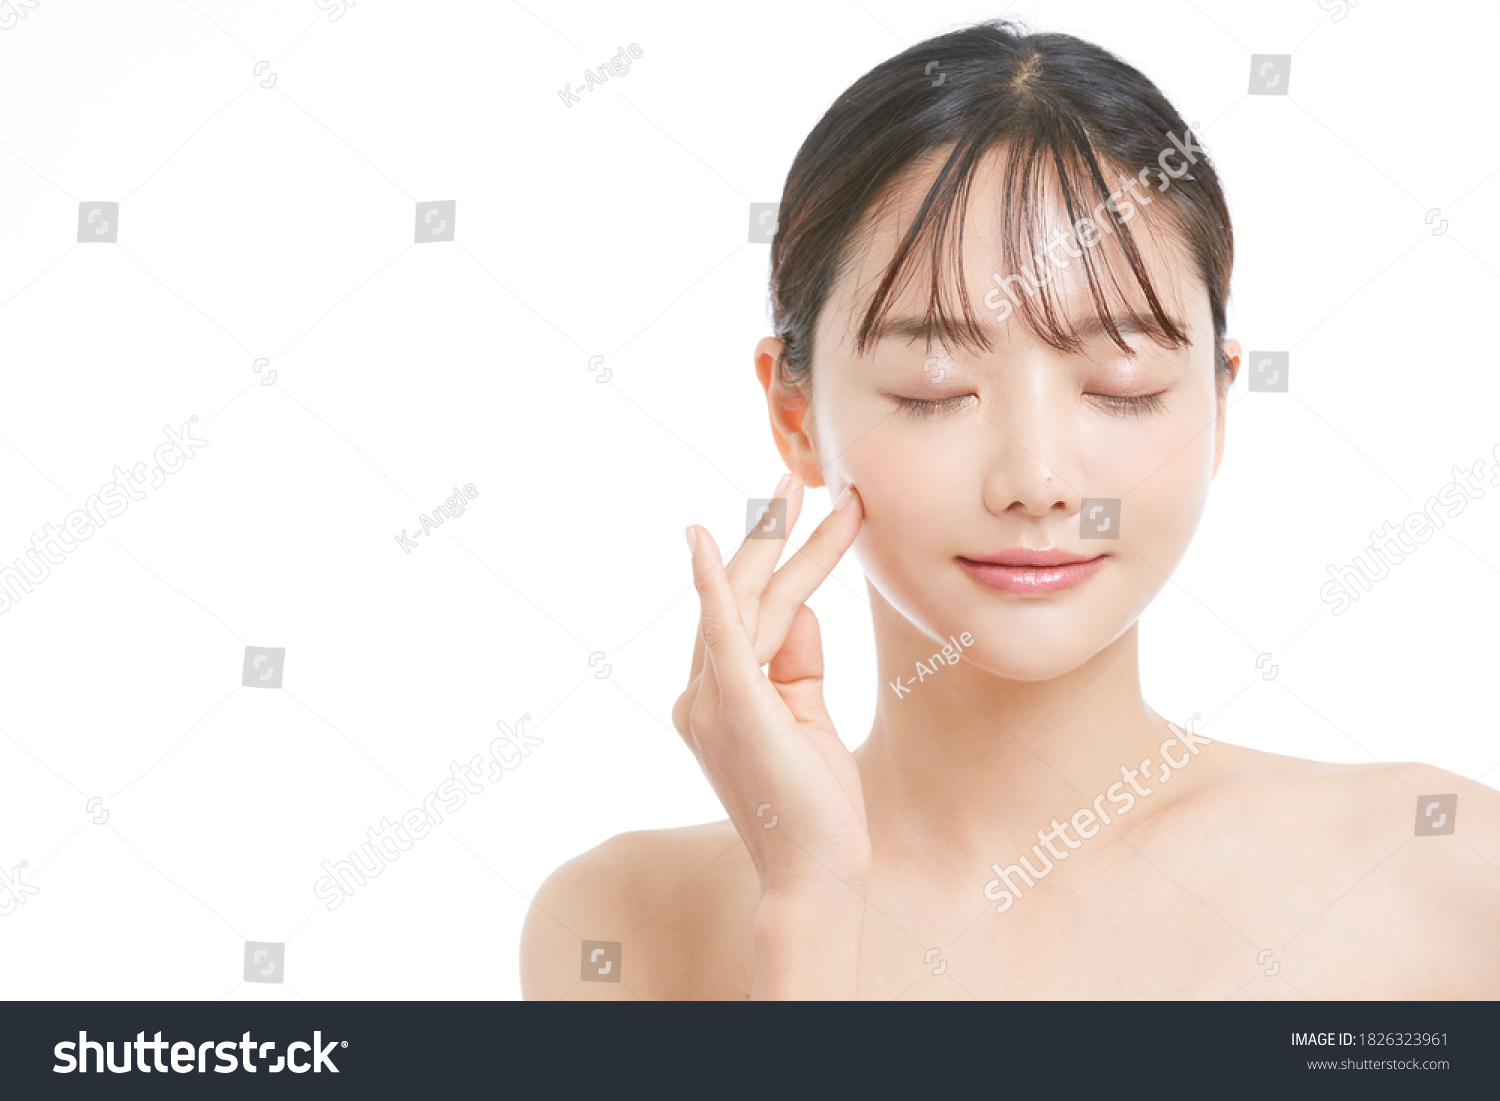 Beauty portrait of young Asian woman on white background #1826323961